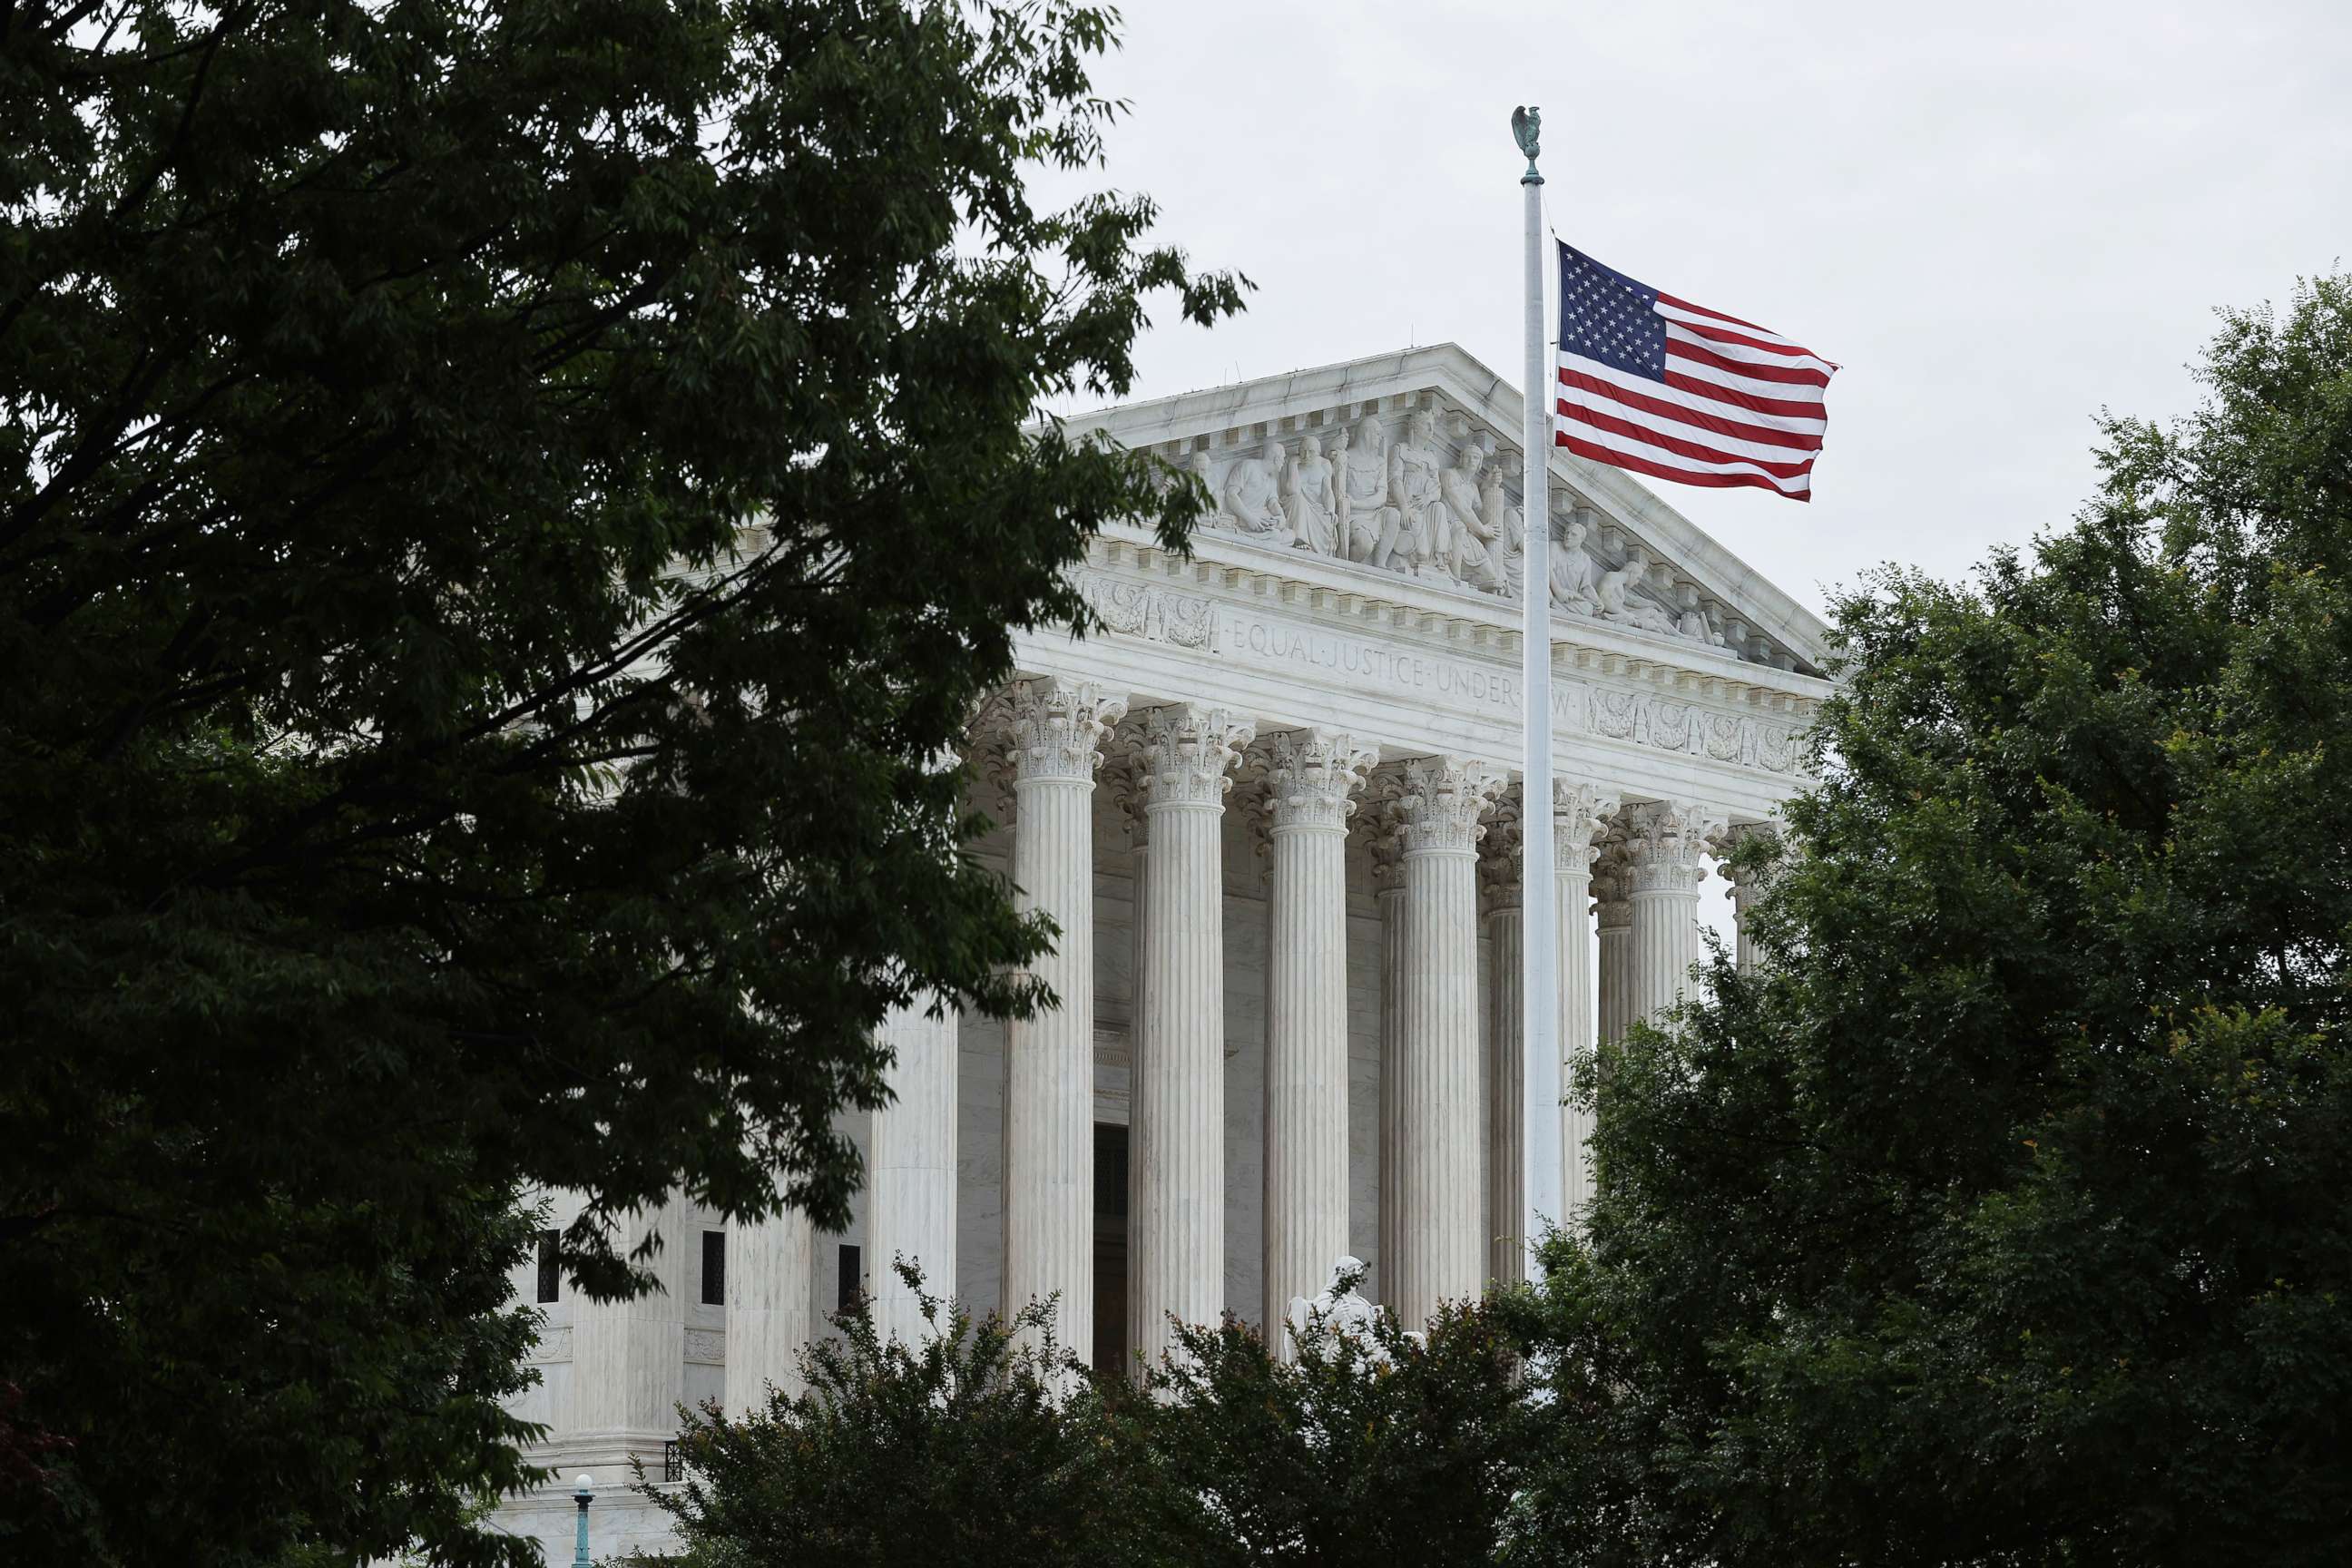 PHOTO: The U.S. Supreme Court is seen on June 15, 2020 in Washington, DC.